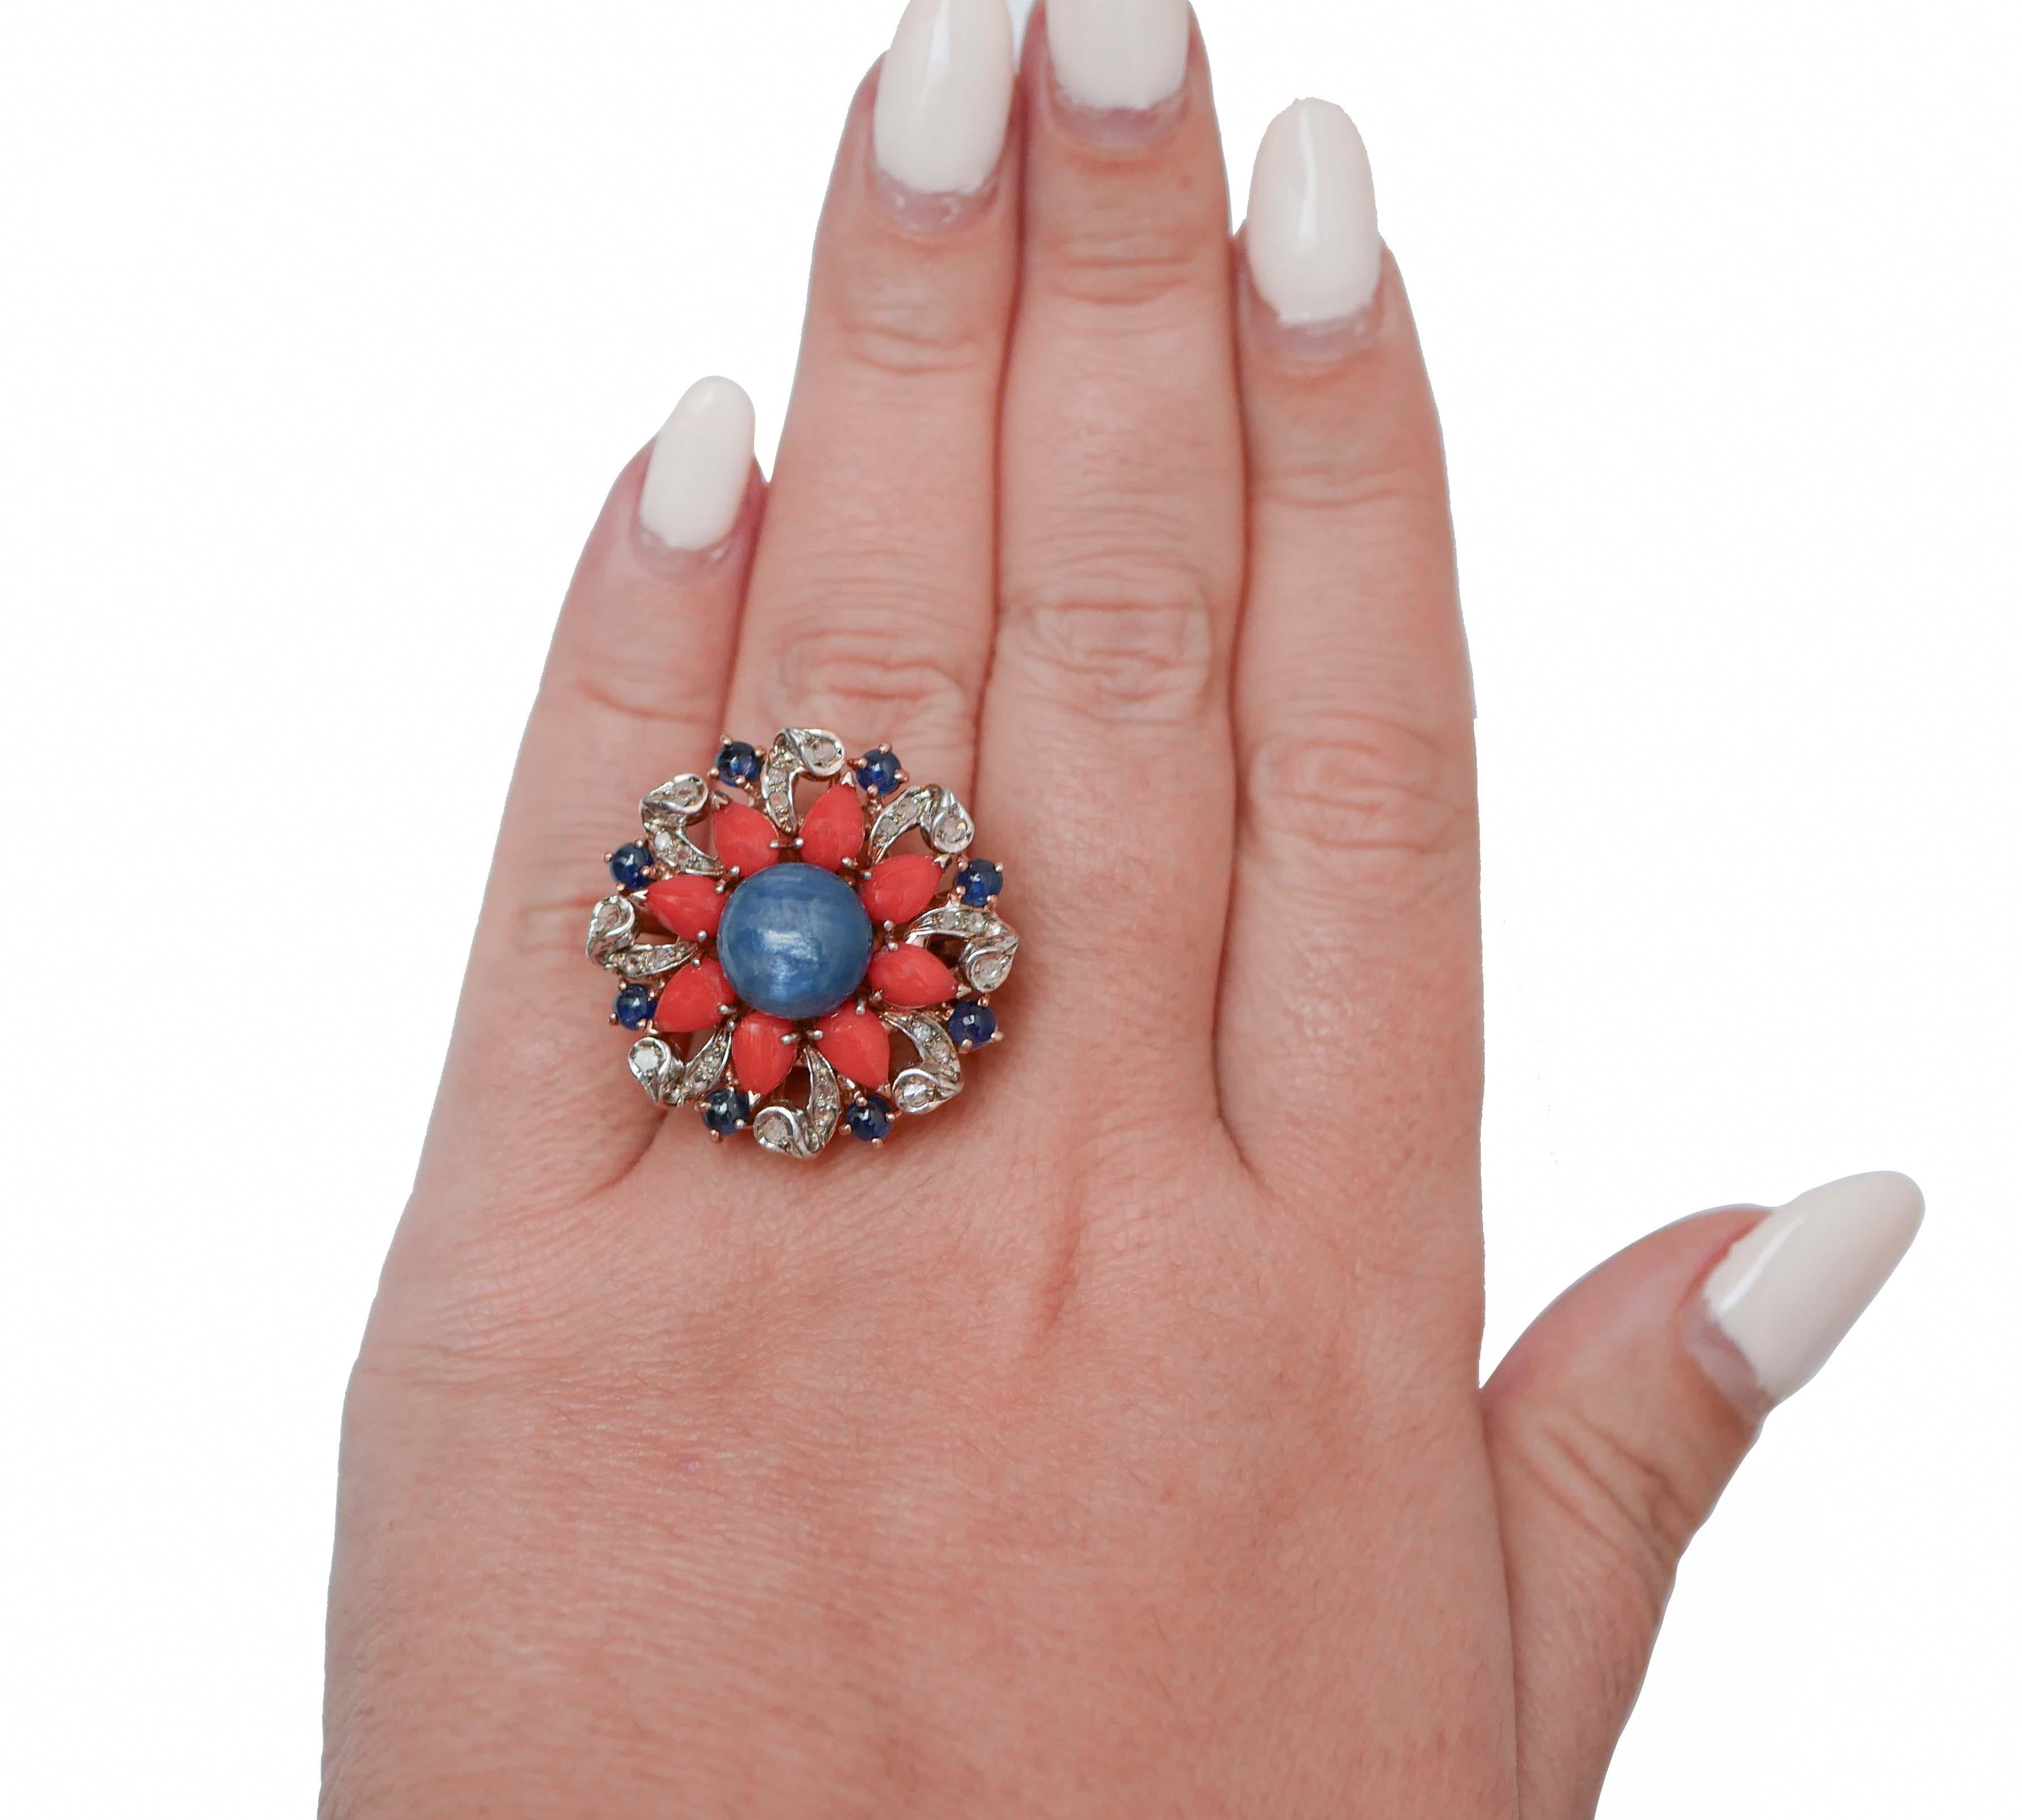 Mixed Cut Kyanite, Sapphires, Corals, Diamonds, Rose Gold and Silver Ring. For Sale